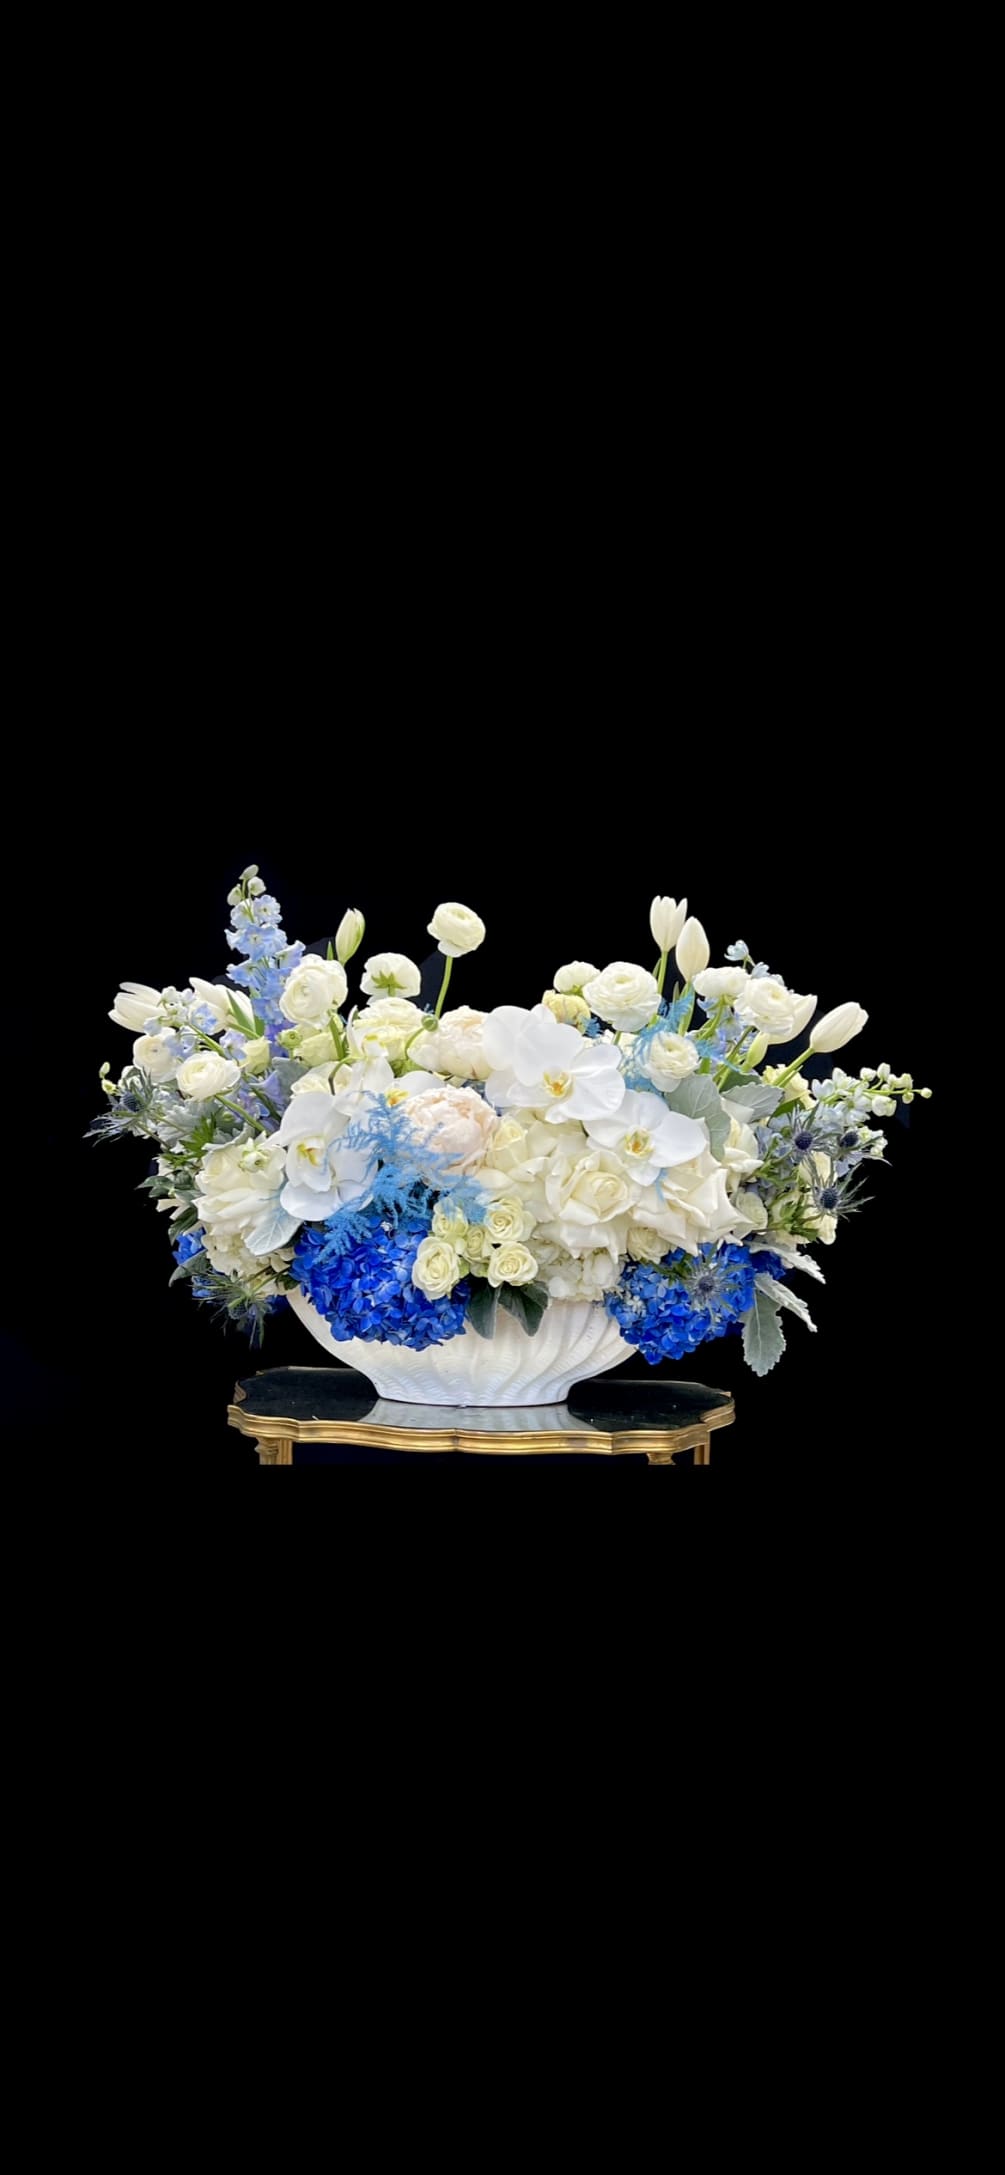 Pink roses, tulips, orchids, white and blue hydrangeas.... This arrangement is a